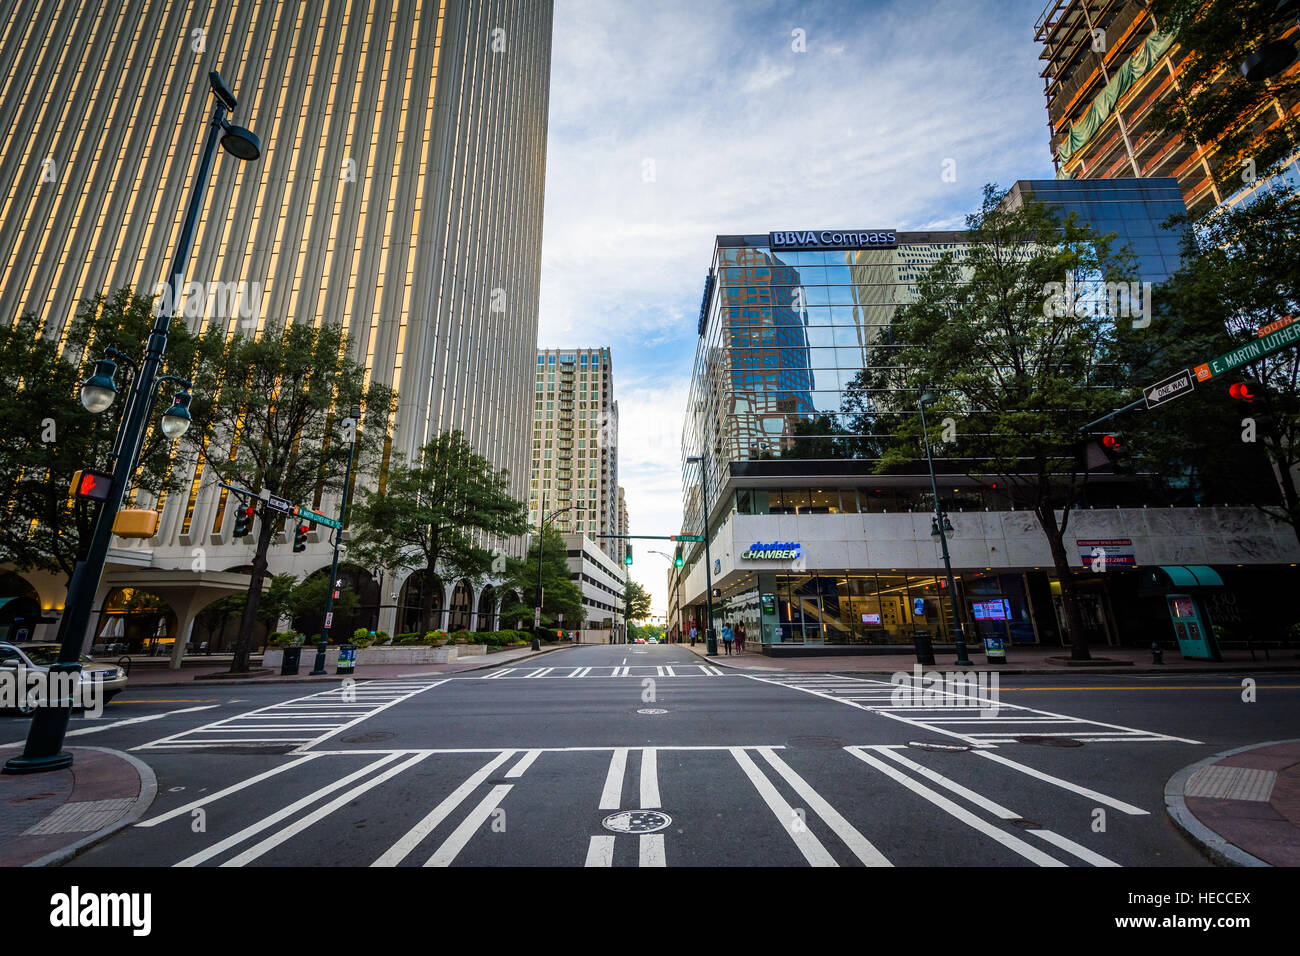 Intersection in Uptown, Charlotte, North Carolina. Stock Photo